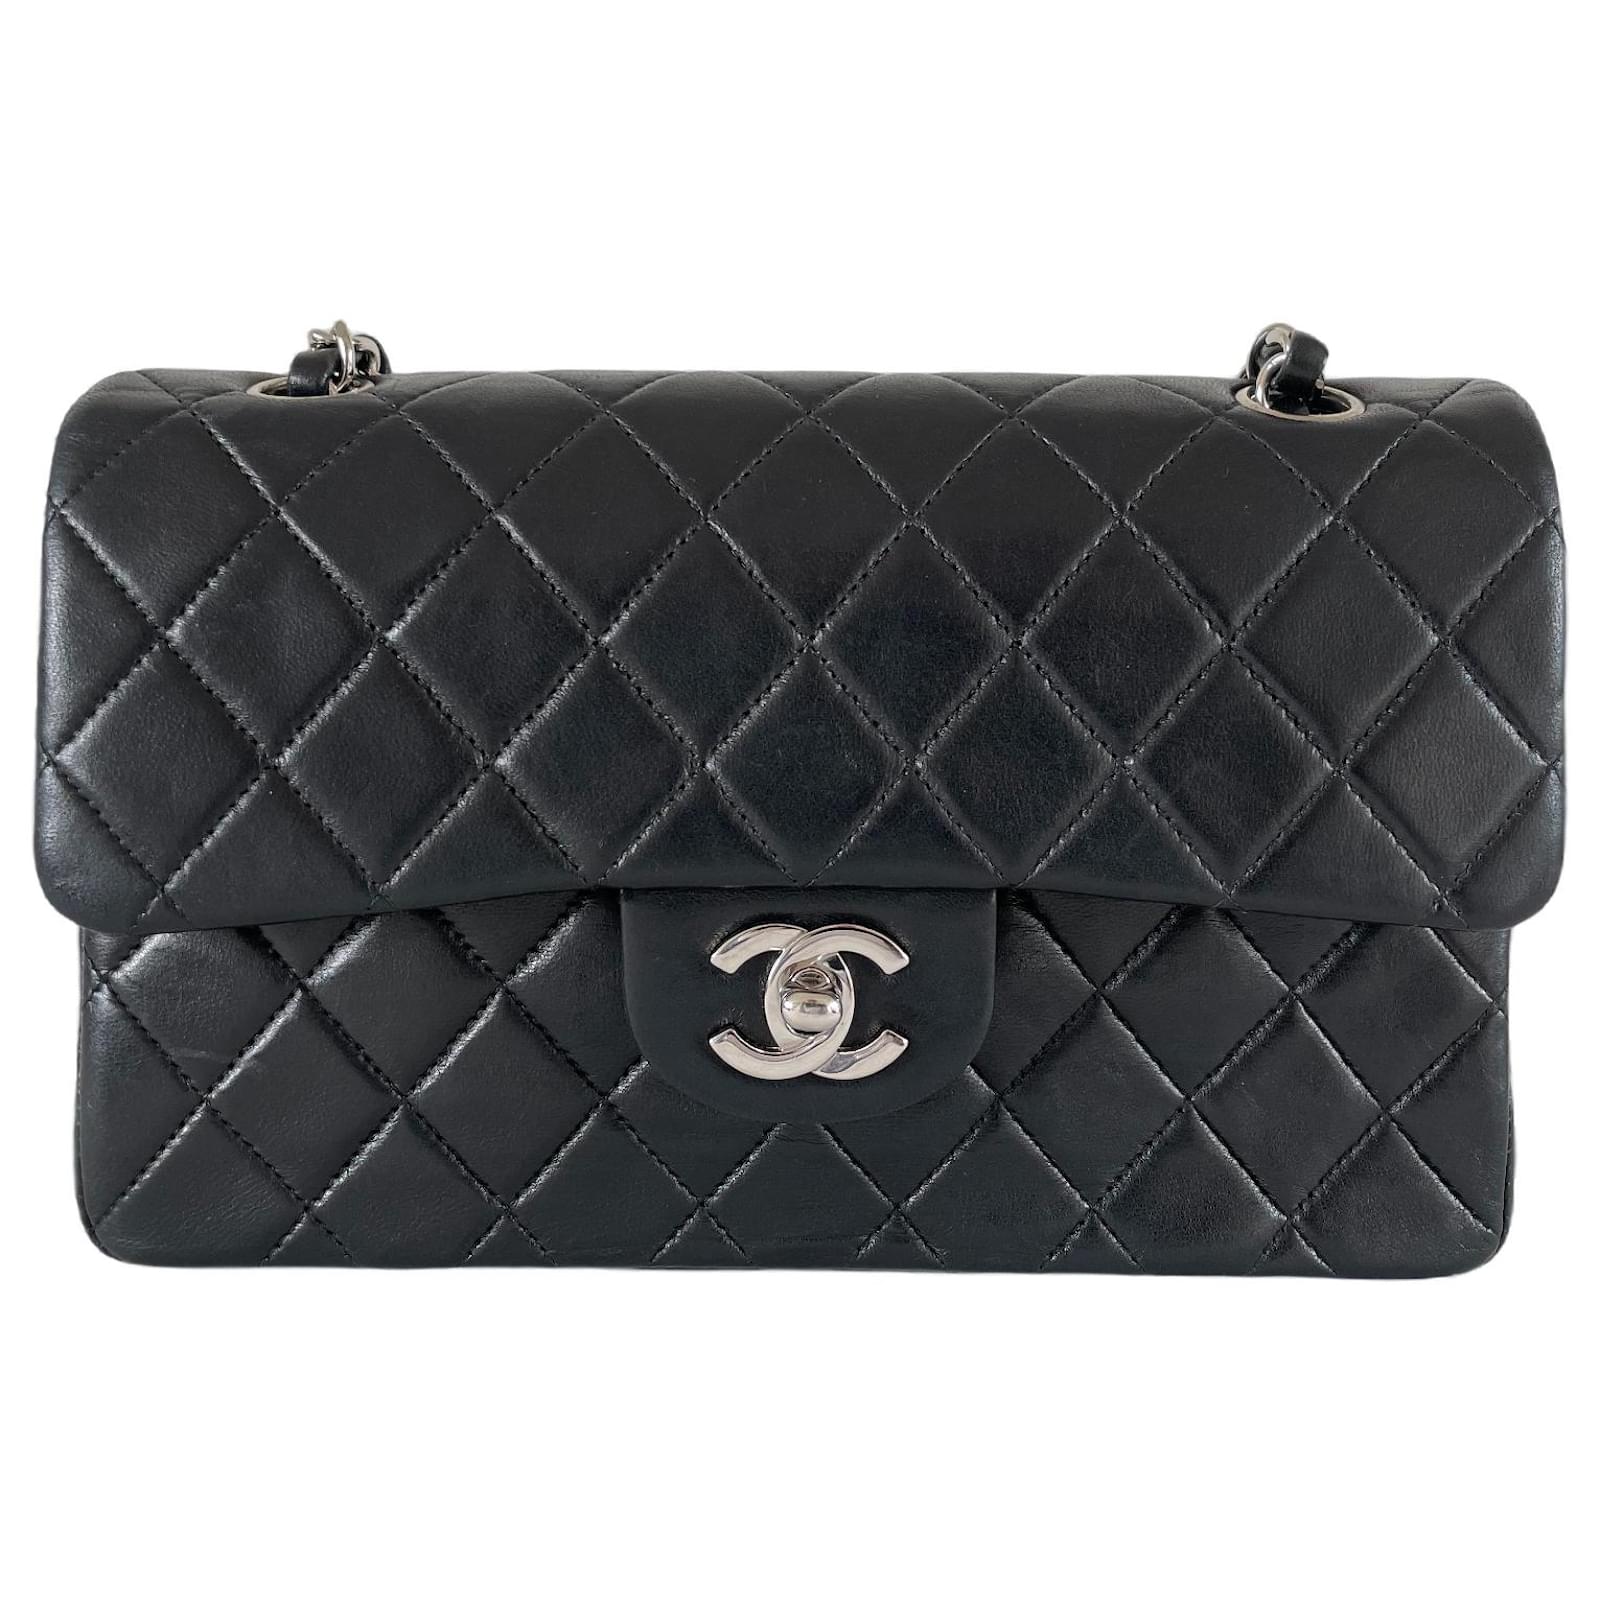 Chanel classic lined flap small silver hardware vintage black